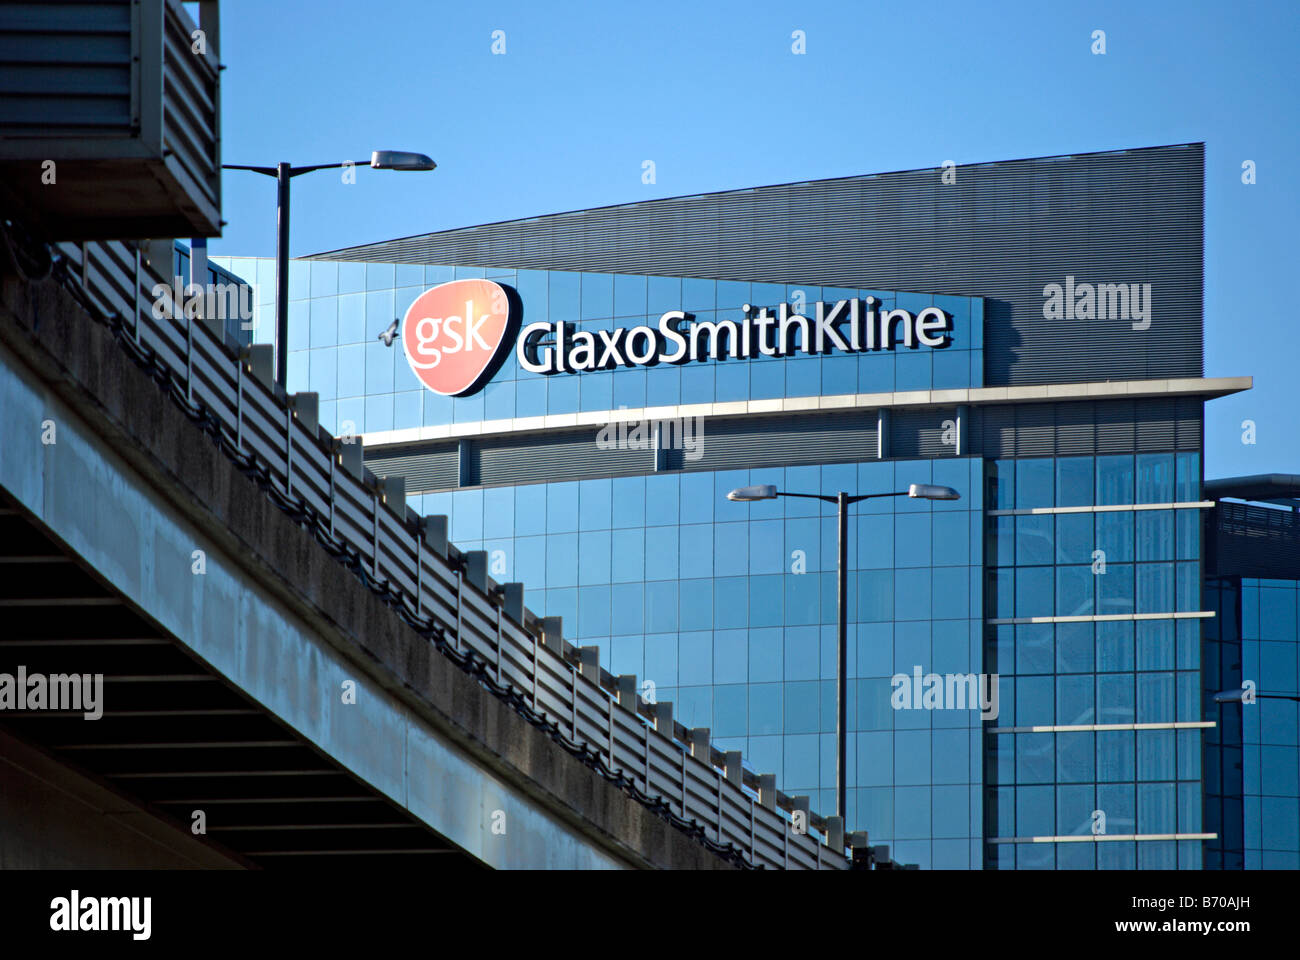 world headquarters of gsk, glaxo smith kline, above the M4 motorway on the great west road, brentford, west london, england Stock Photo